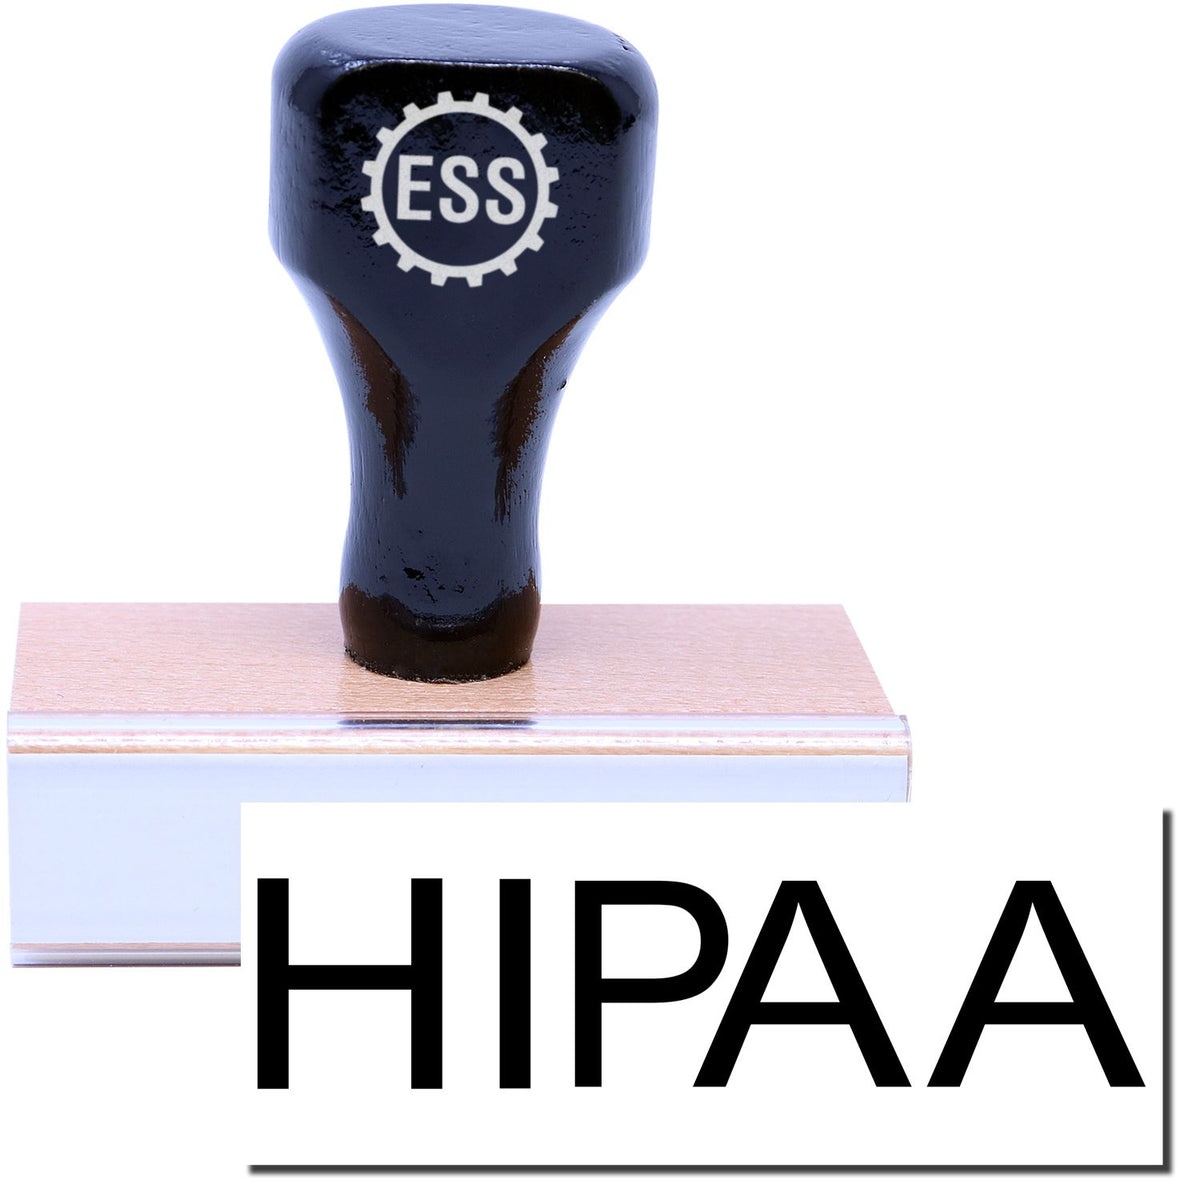 A stock office rubber stamp with a stamped image showing how the text &quot;HIPAA&quot; in a large font is displayed after stamping.